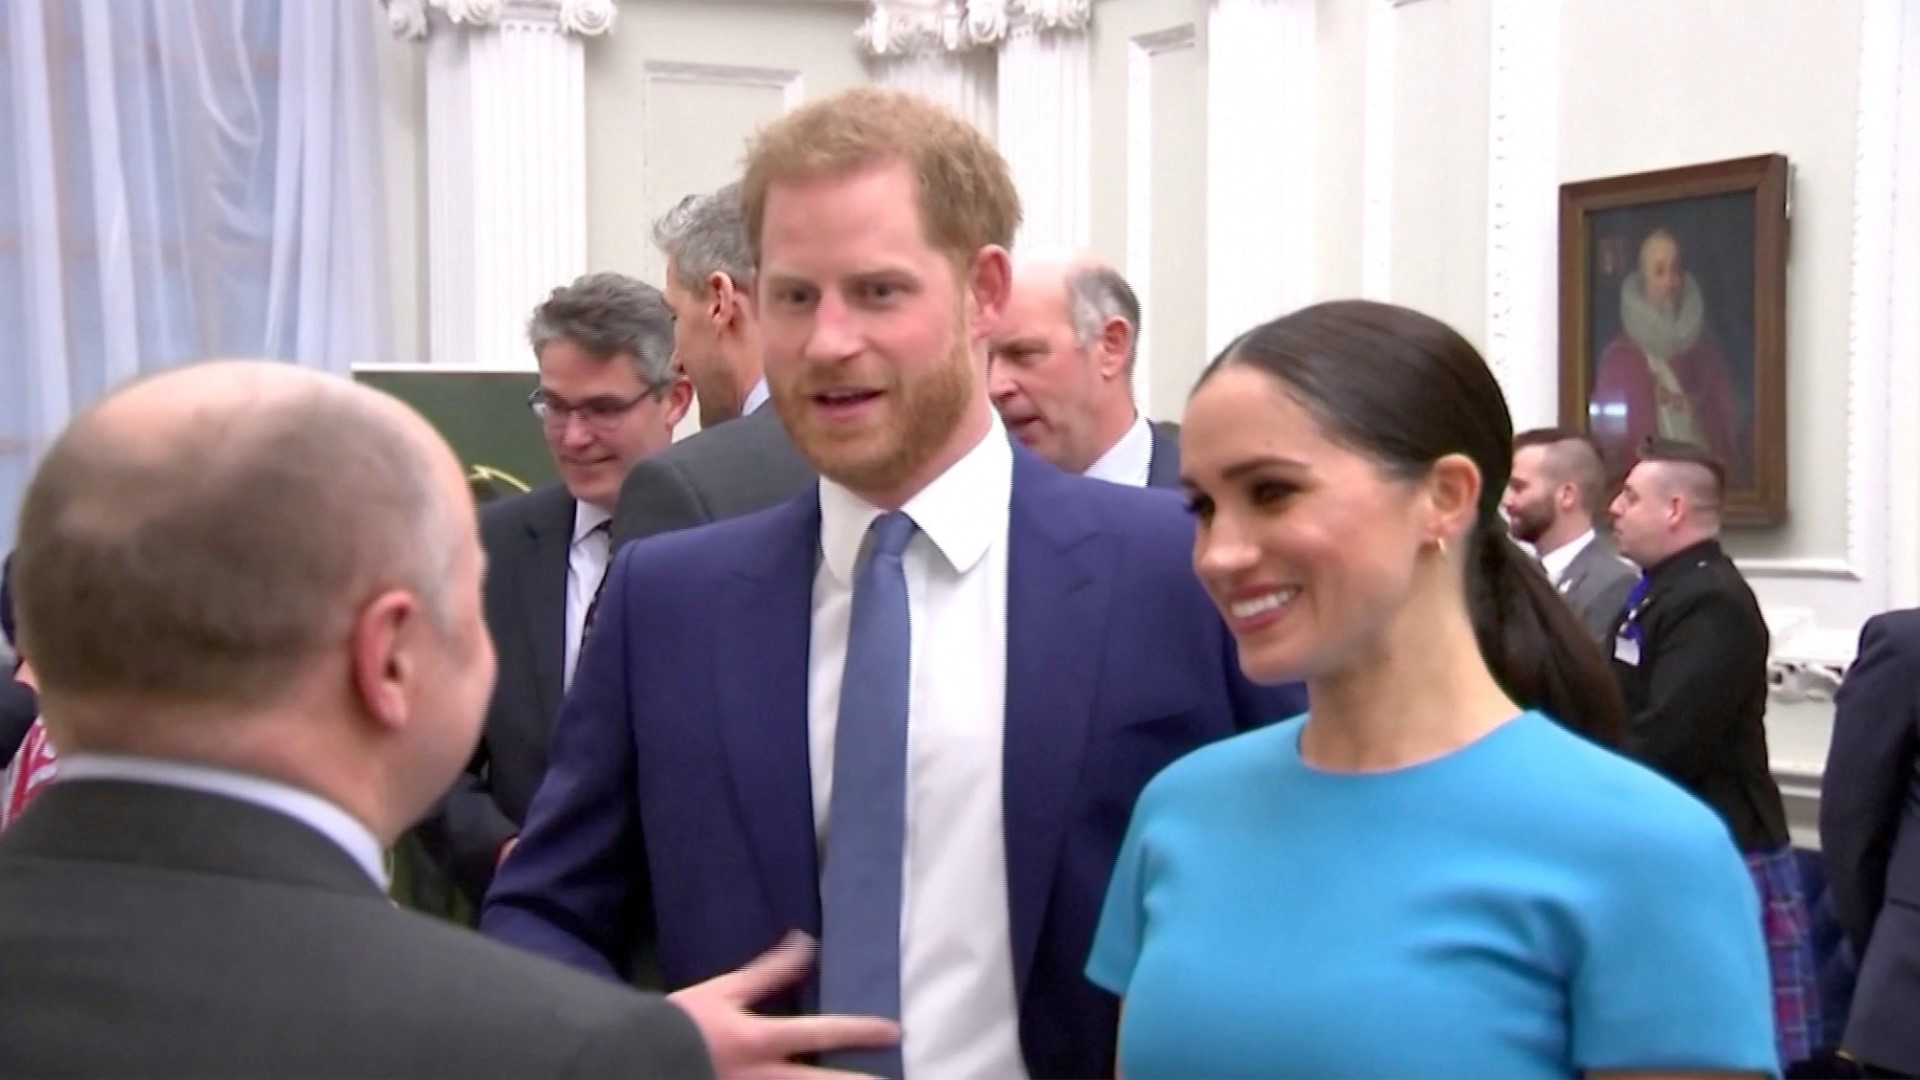 Prince Harry and Meghan Markle are reportedly are content in their new life. Buzz60's Keri Lumm reports.